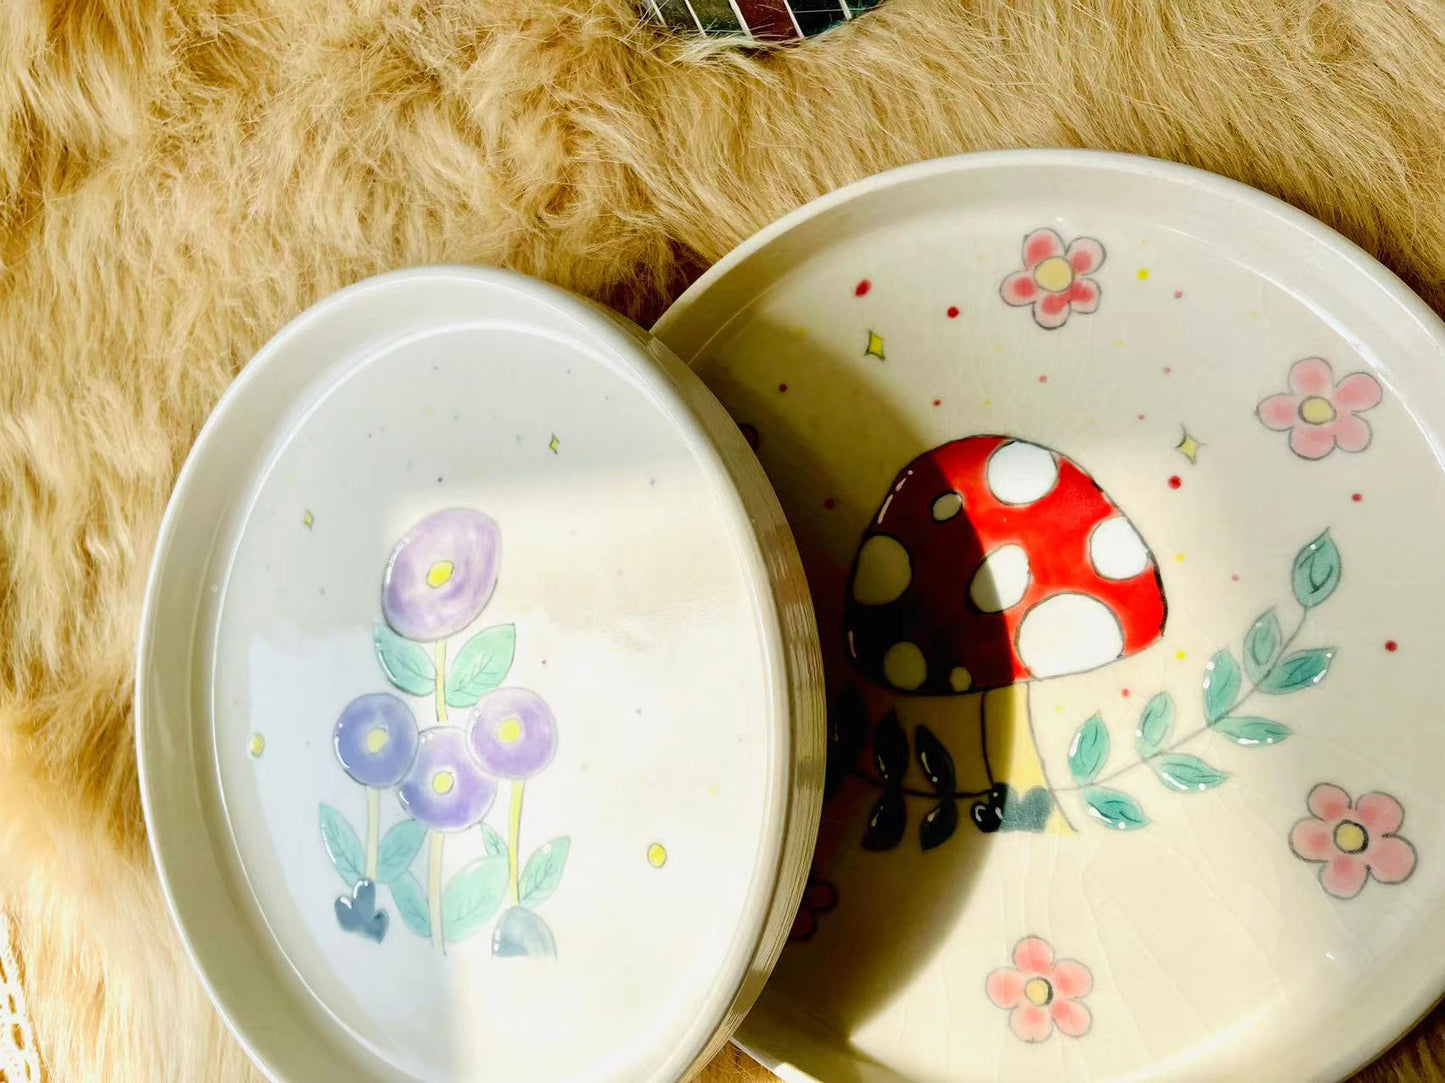 Handcrafted Mushroom Ceramic Plate, Personalized Floral Handmade Pottery Dinnerware for Gifts